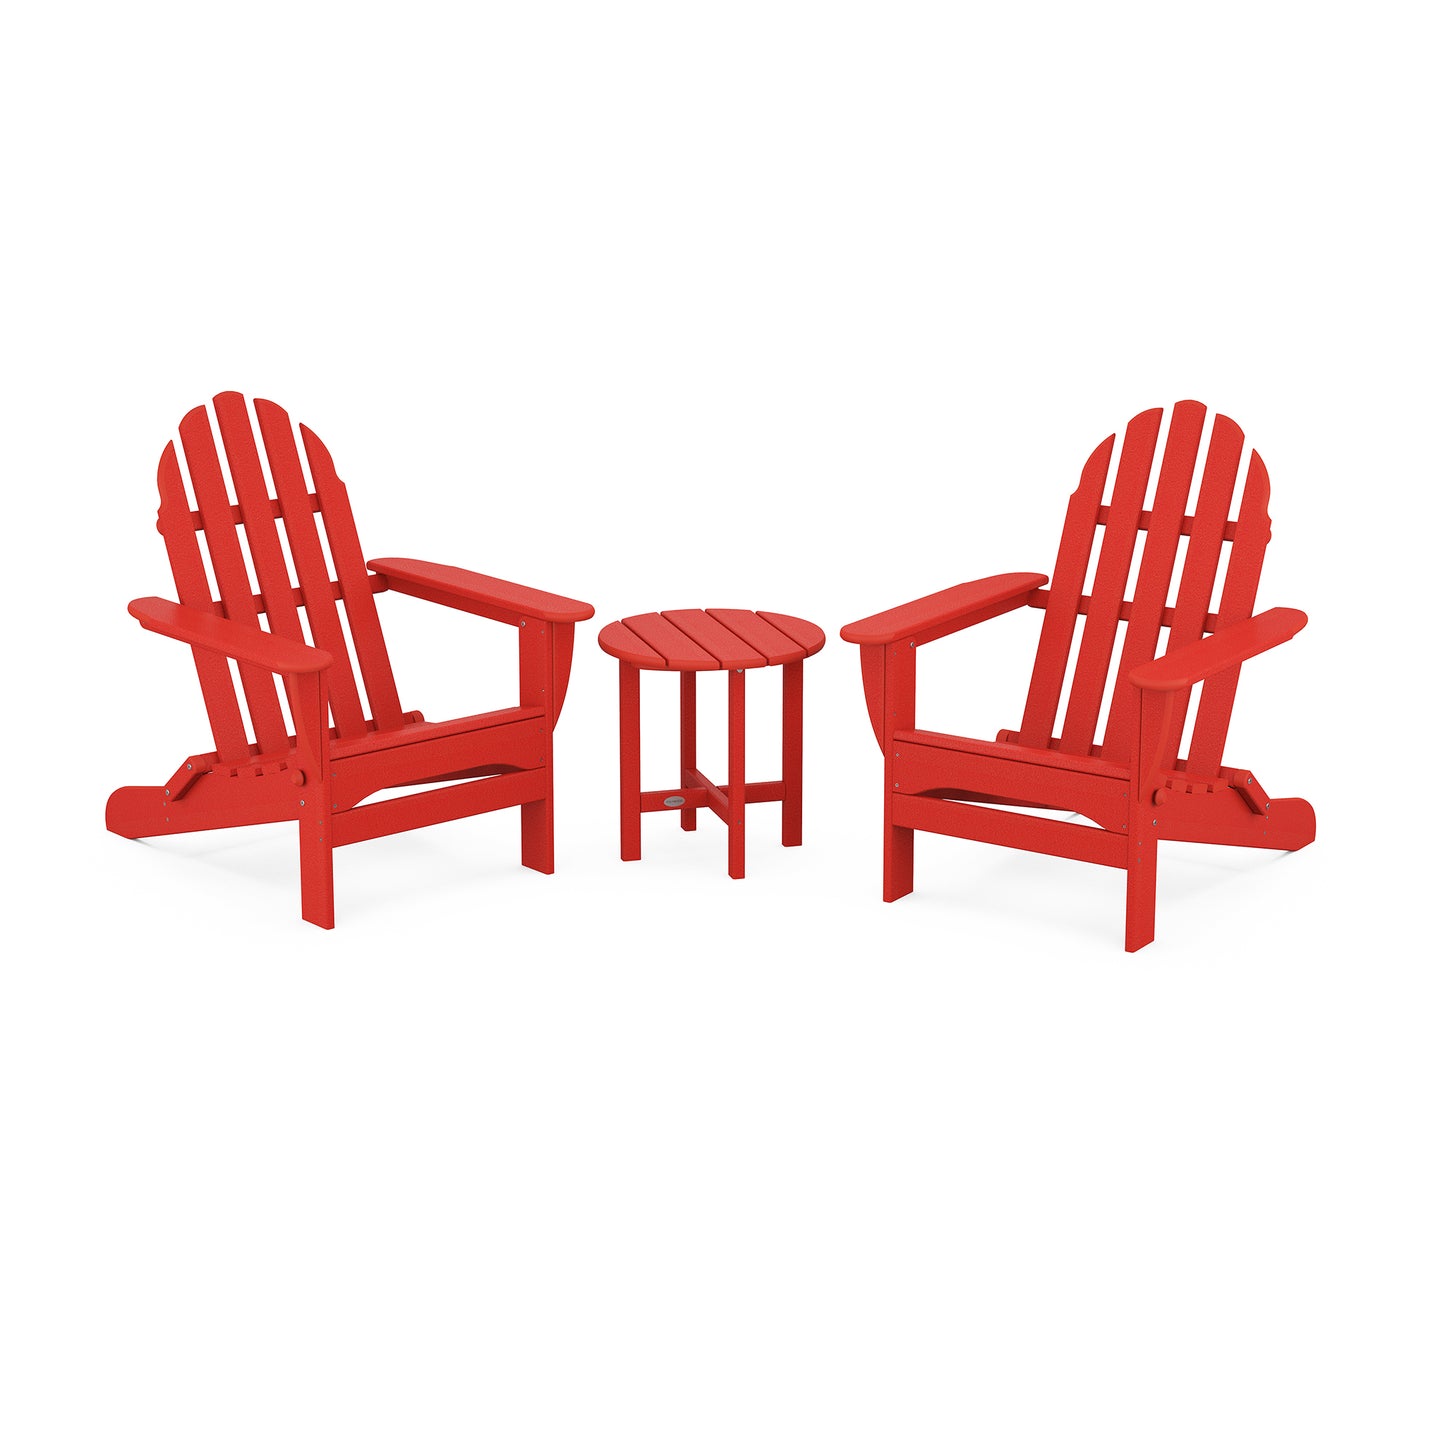 Two red POLYWOOD Classic Folding Adirondack 3-Piece Sets face each other with a small round table between them, set against a plain white background.